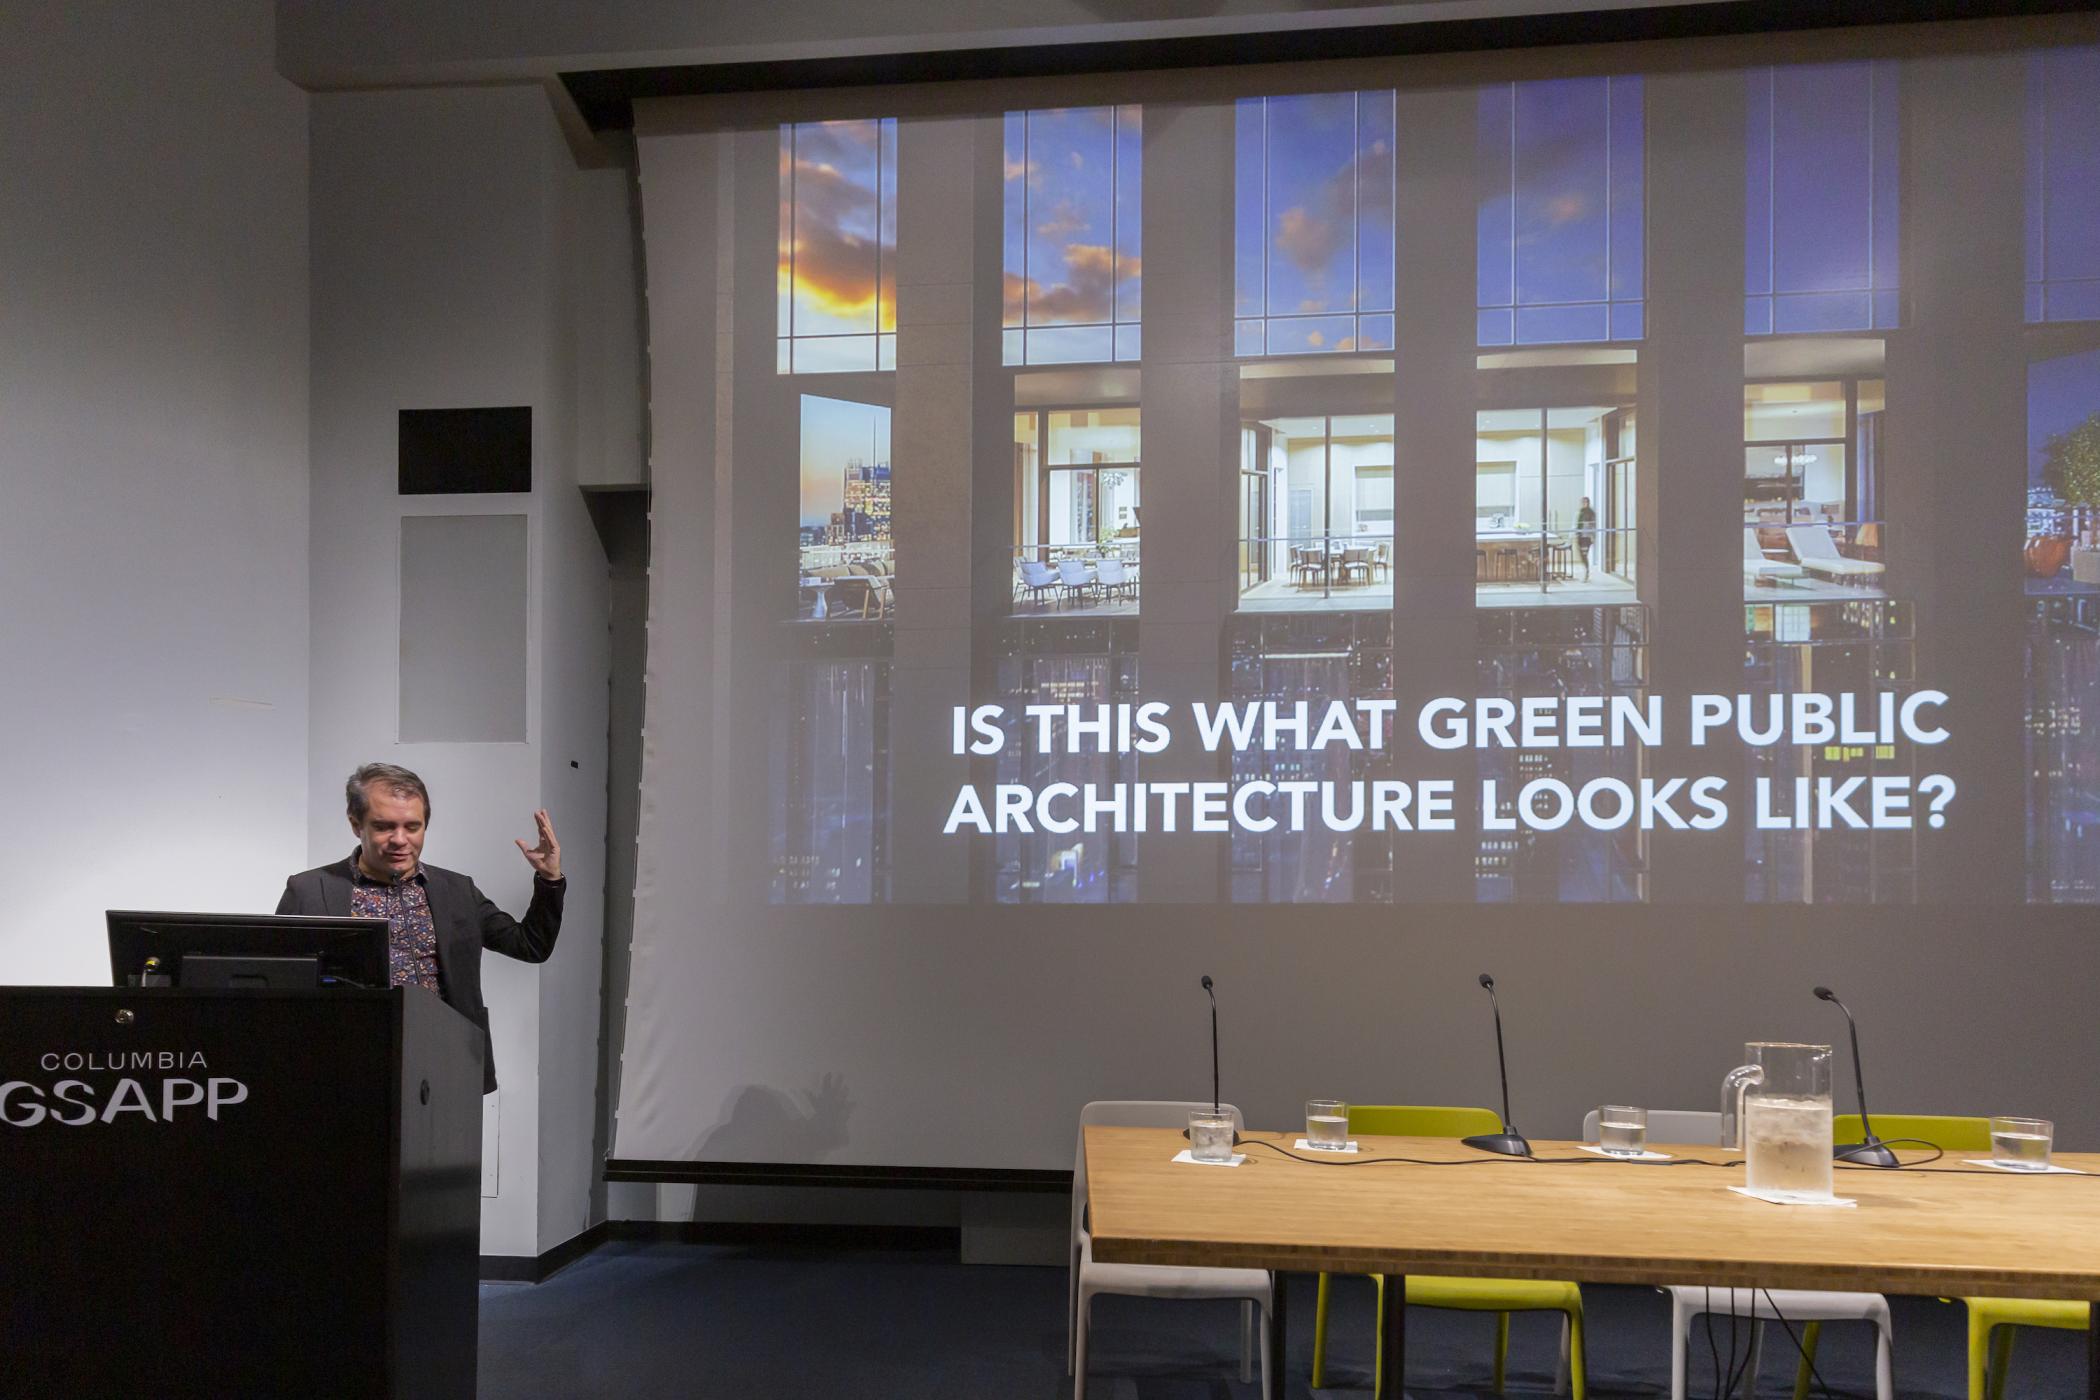 Andres Jaque stands at the podium gesticulating in front of a slide of a modern glass building with text saying "is this what green public infrastructure looks like?"